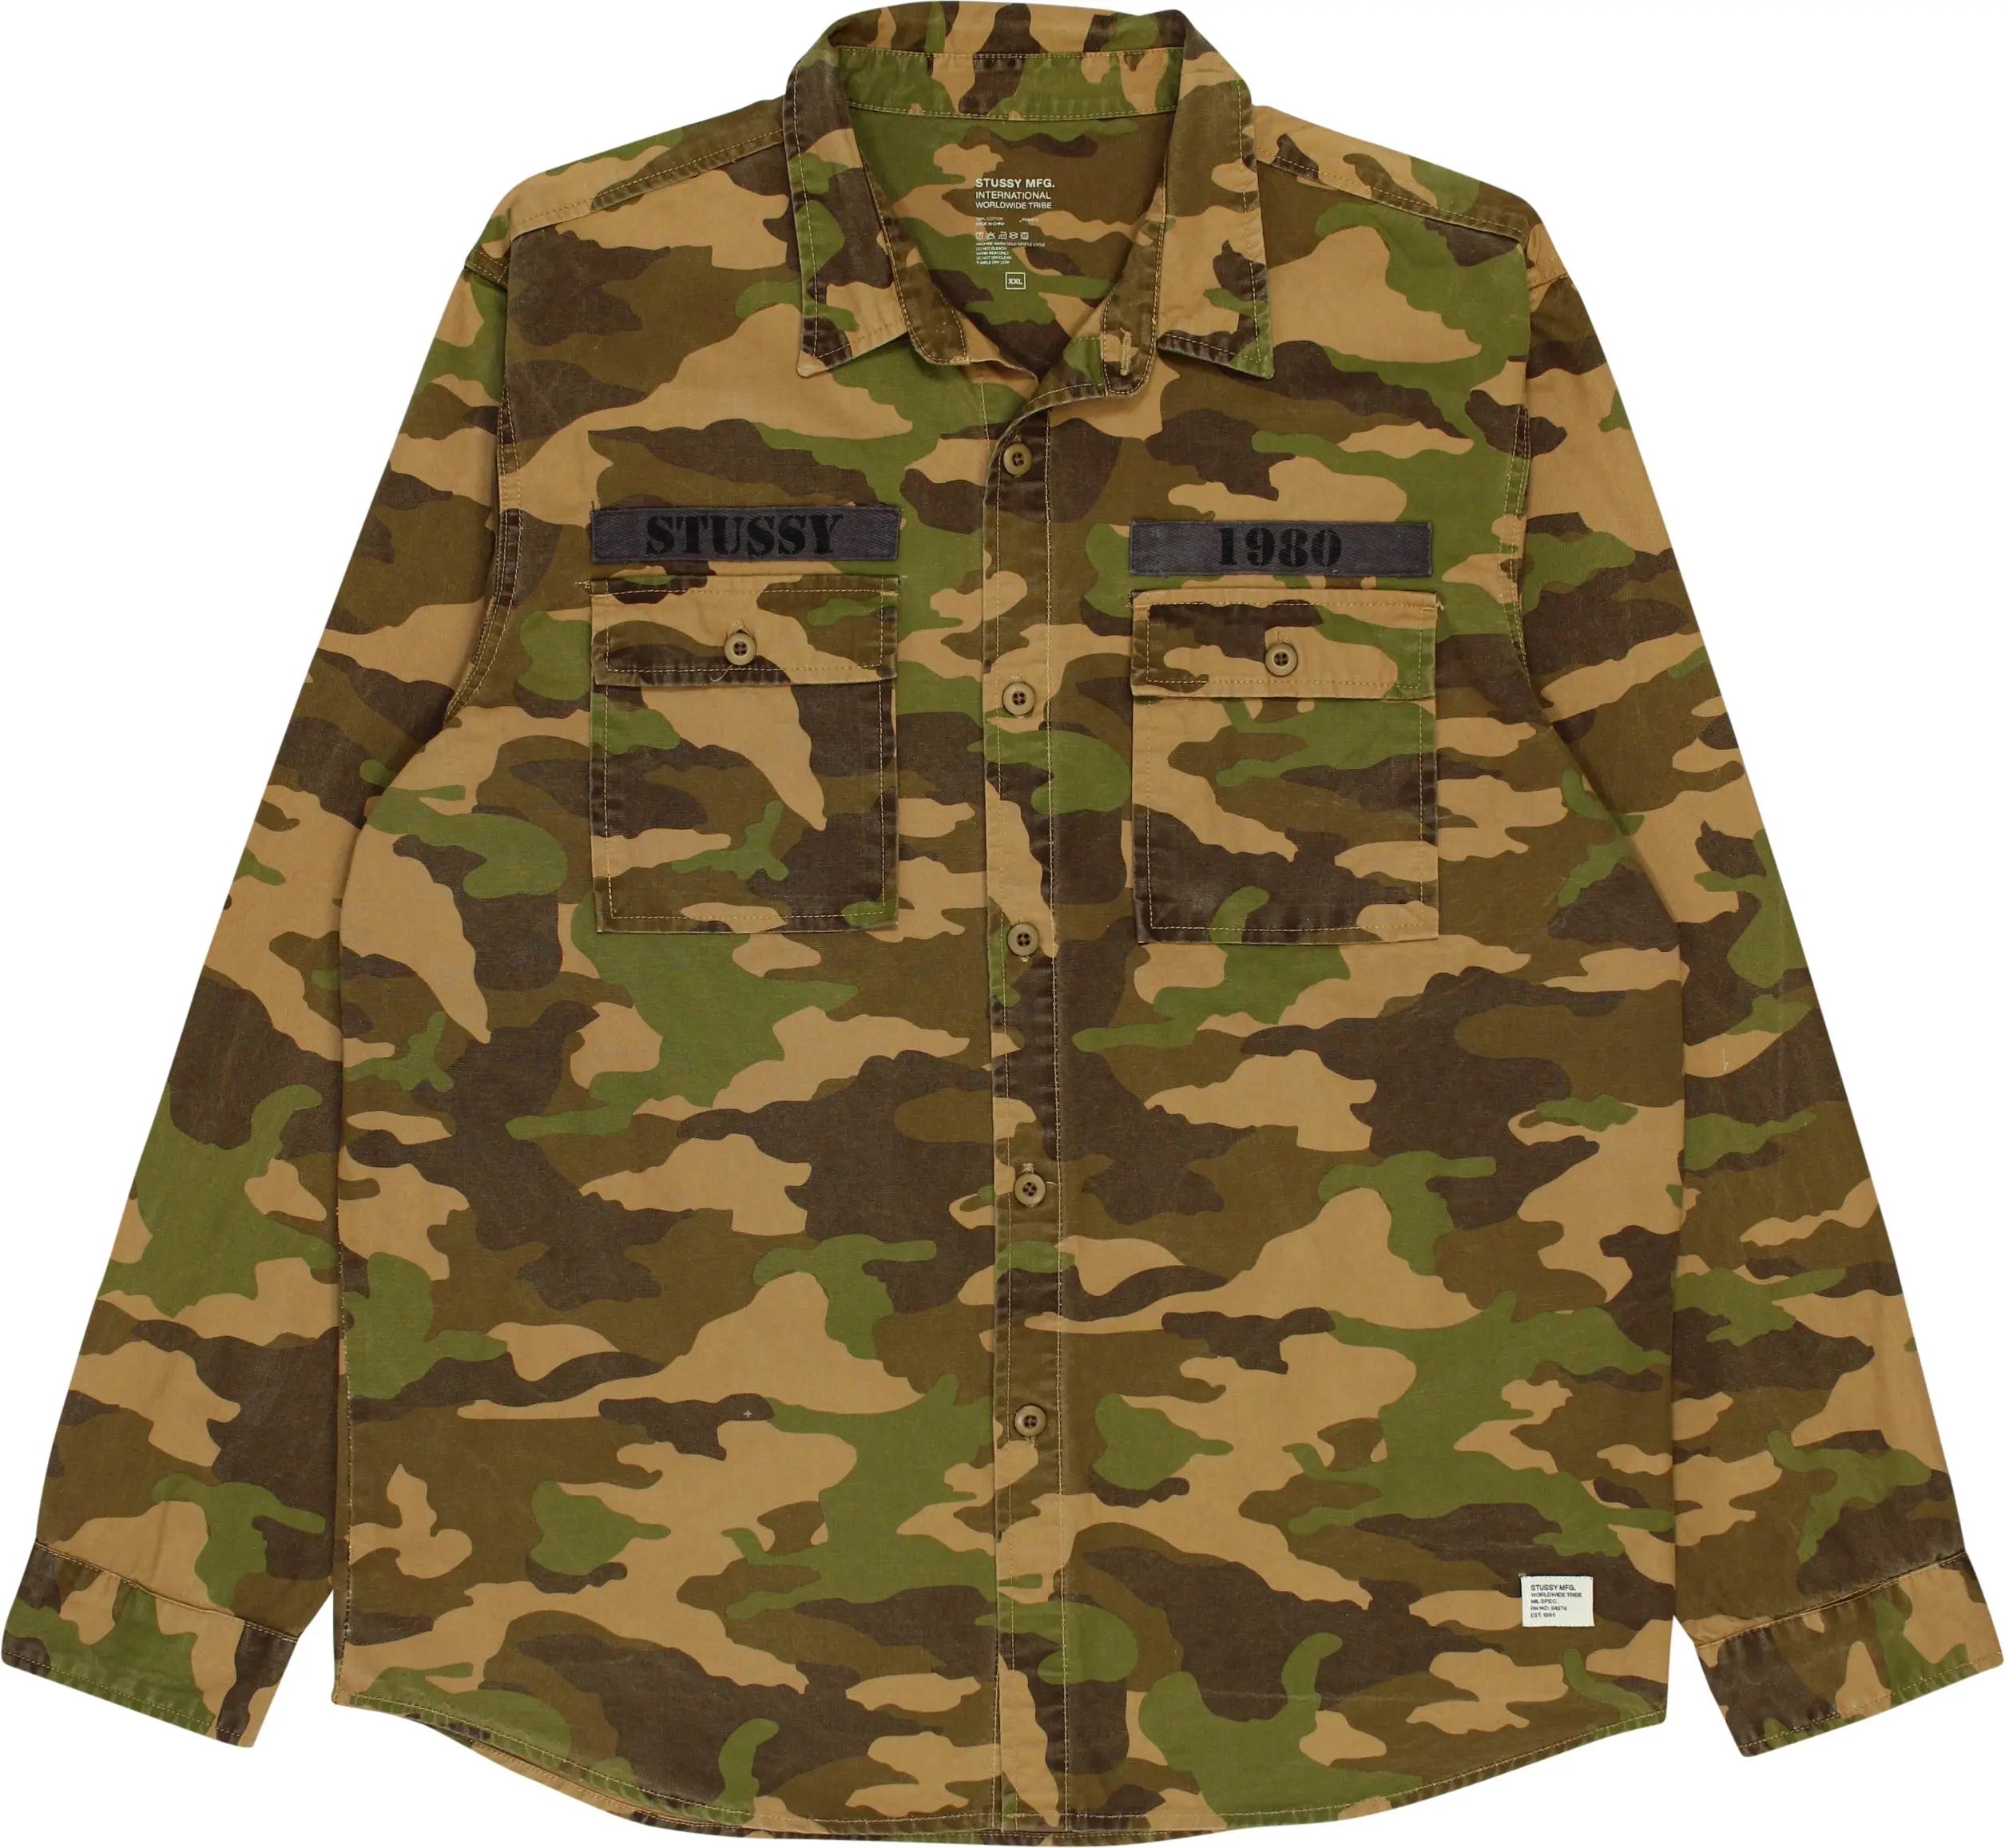 Stussy - Camouflage Jacket by Stussy- ThriftTale.com - Vintage and second handclothing